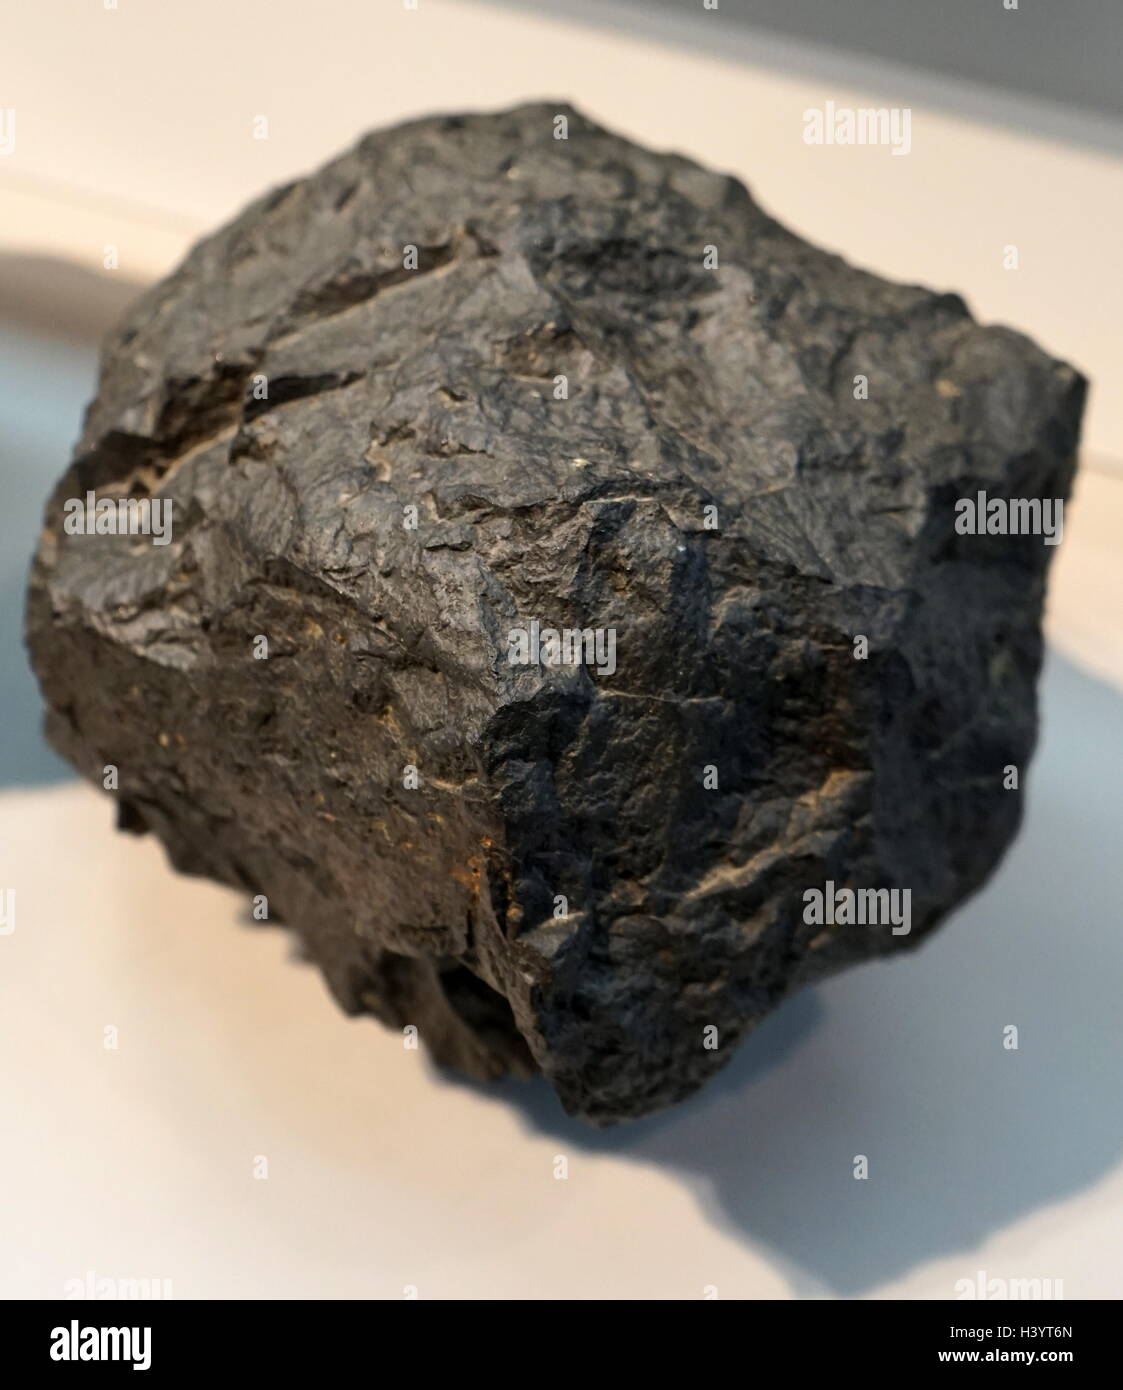 A sample of Oceanic Basalt, a dark-coloured, fine-grained, igneous rock composed mainly of plagioclase and pyroxene minerals. Dated 21st Century Stock Photo